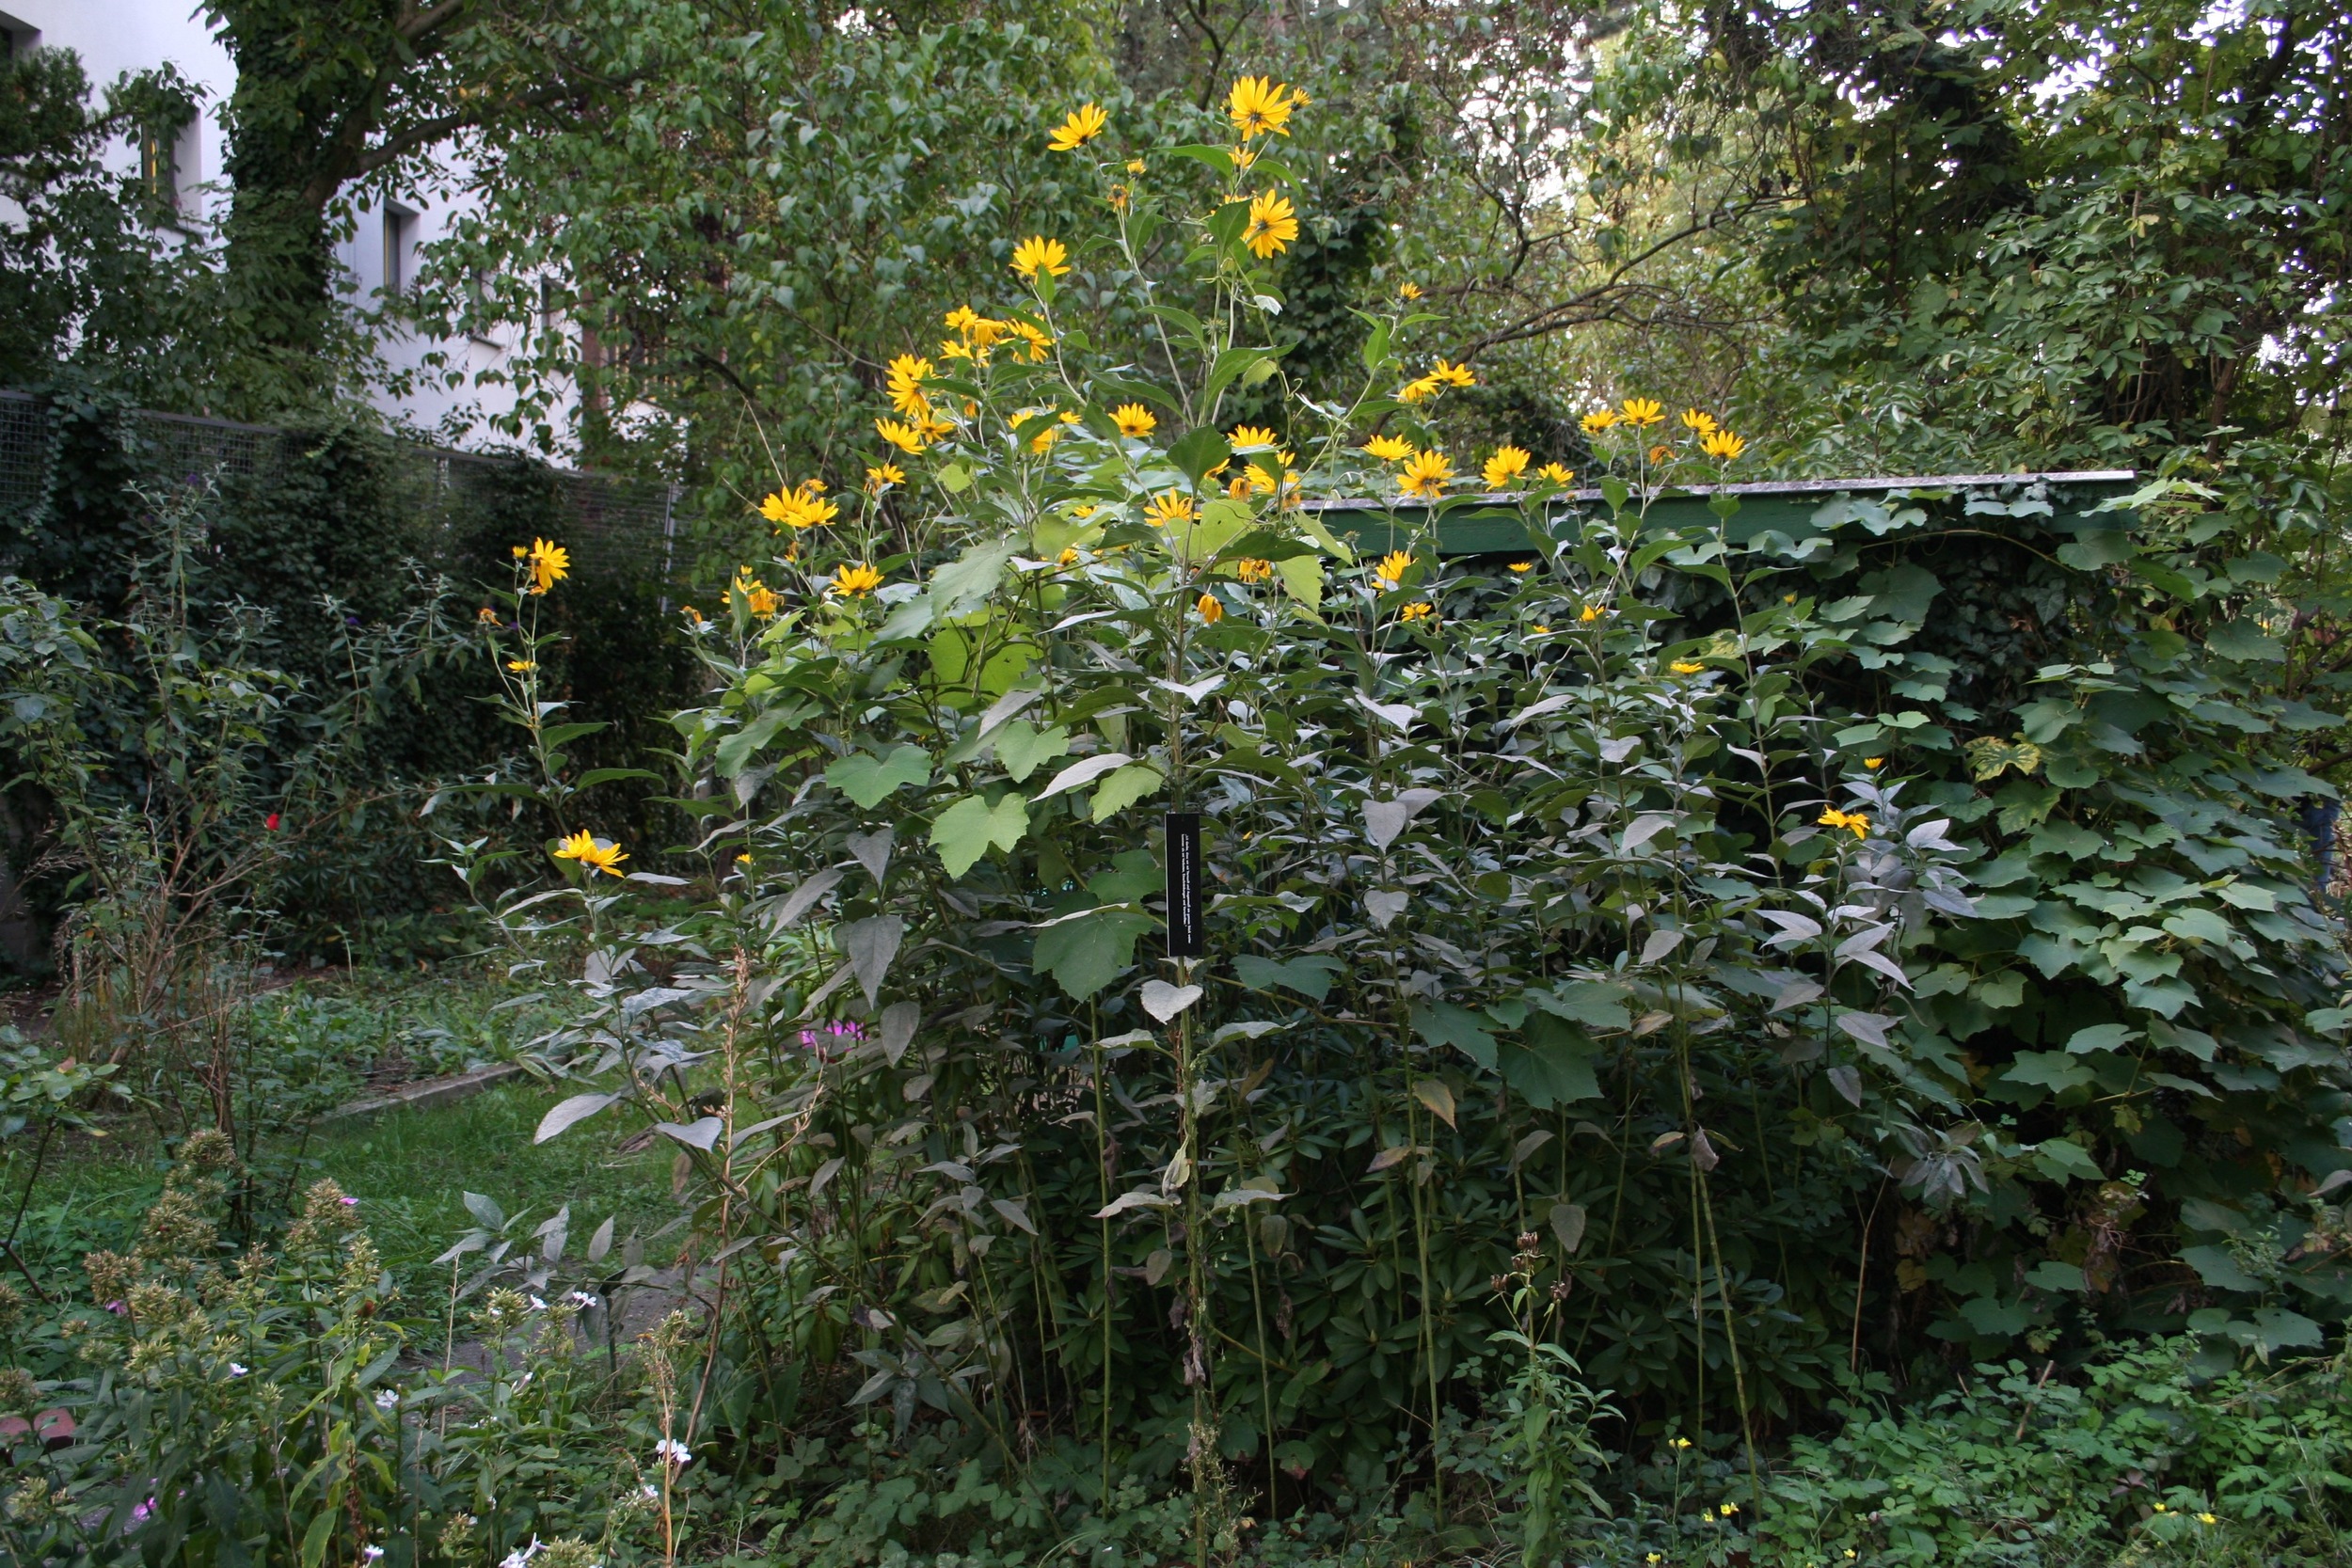 Comments on Our Garden, 2015